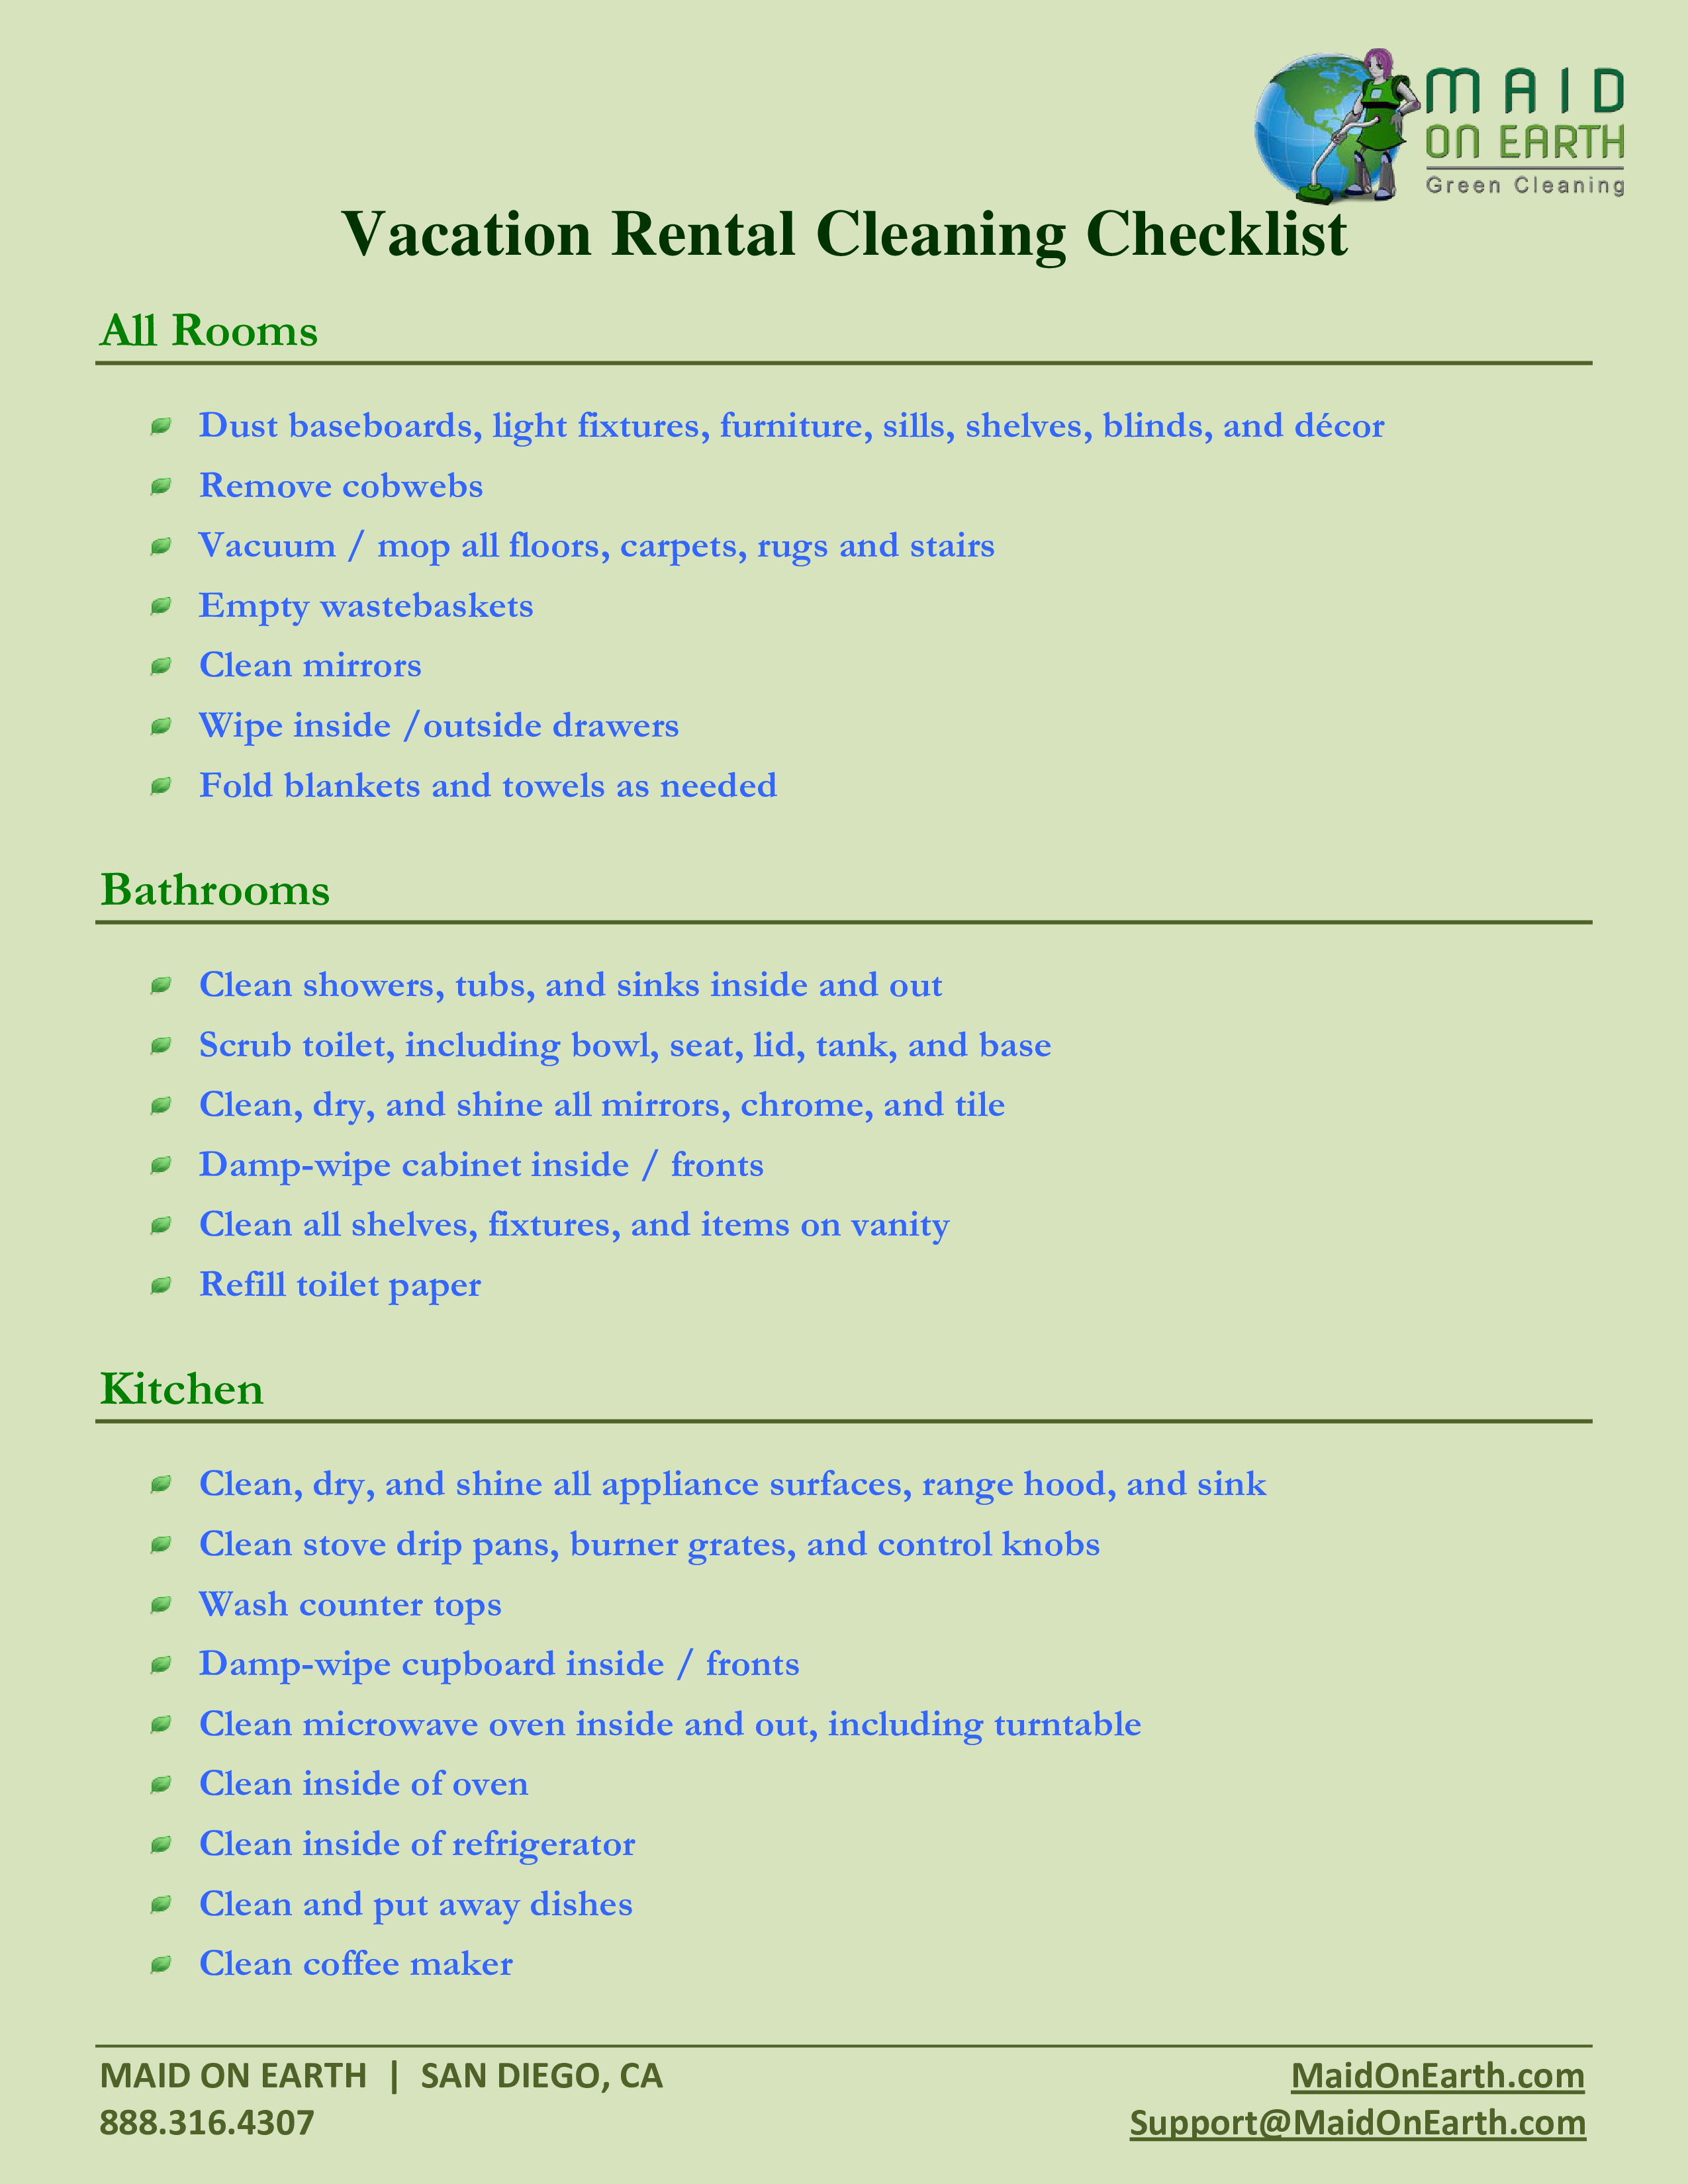 Vacation Rental Cleaning Checklist main image